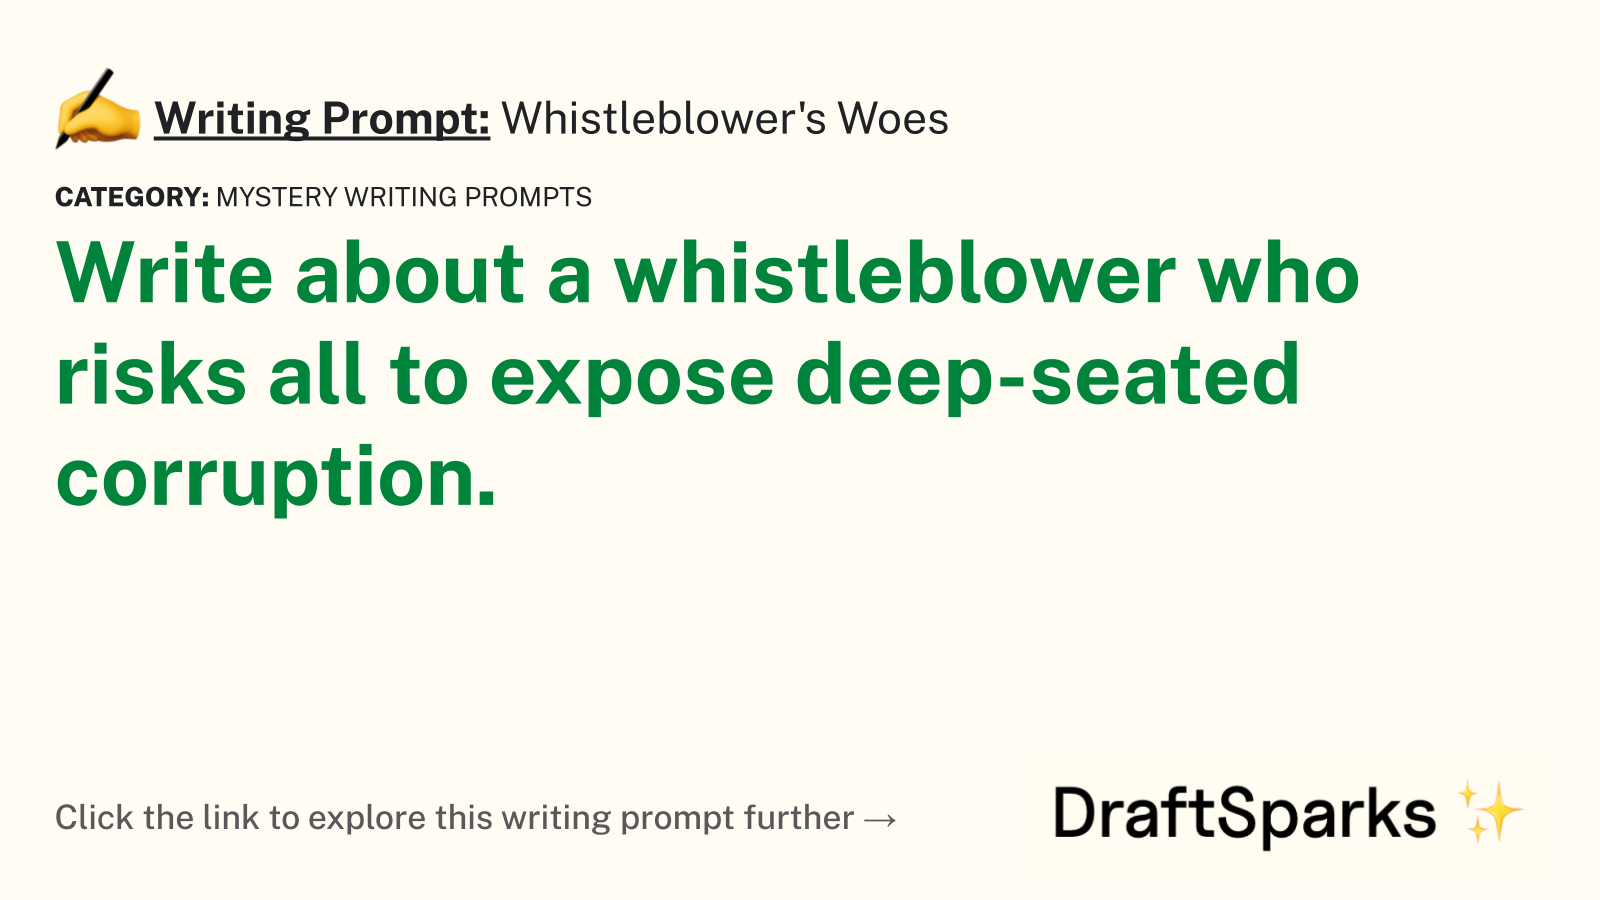 Whistleblower’s Woes